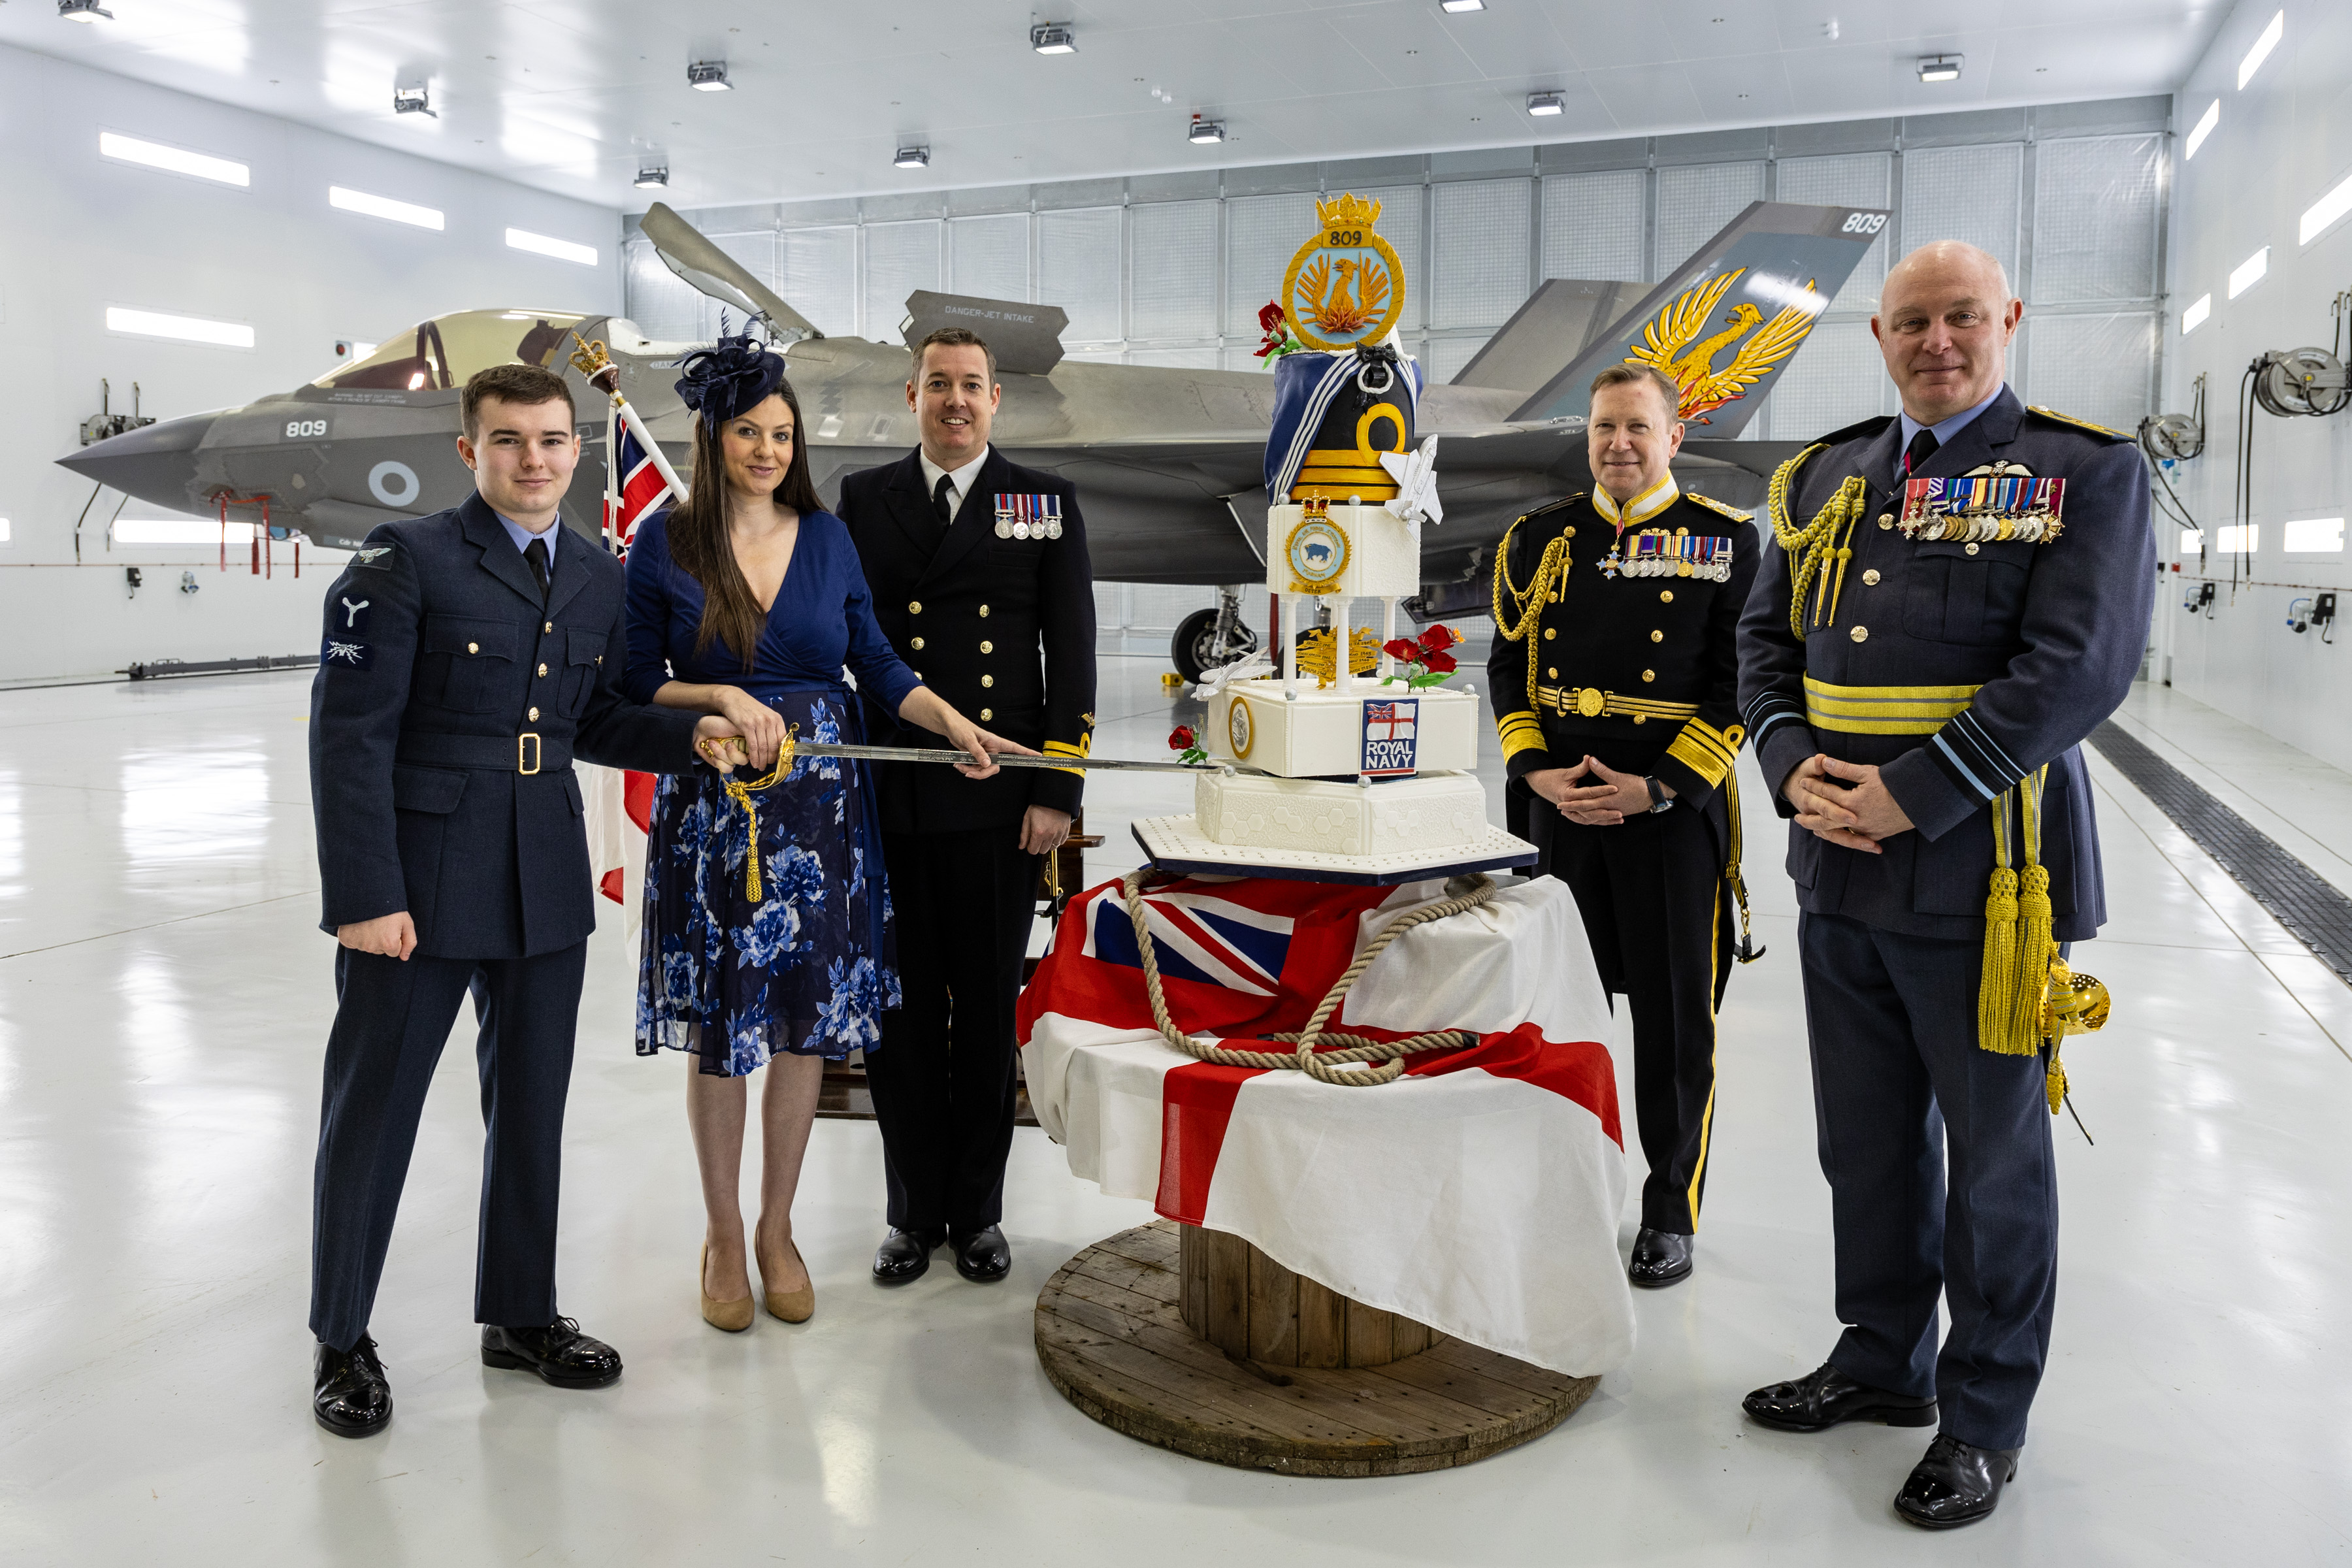 Group of 5 people from a mix of the RAF and the Navy standing facing the camera, with a 809 Squadron cake being cut in the middle.